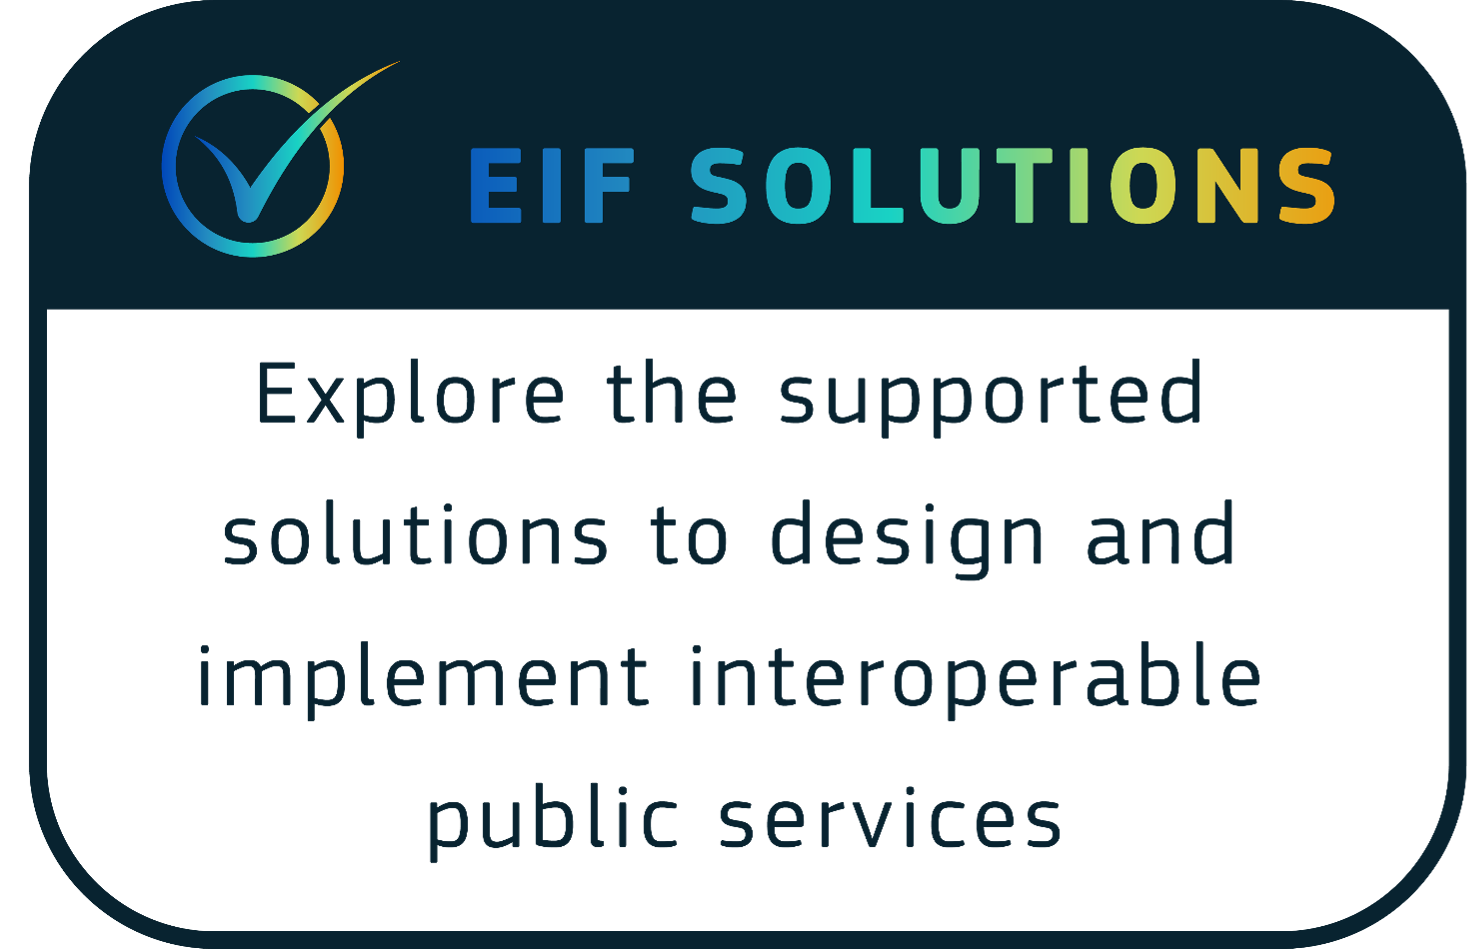 EIF solutions: Explore the supported solutions to design and implement interoperable public services